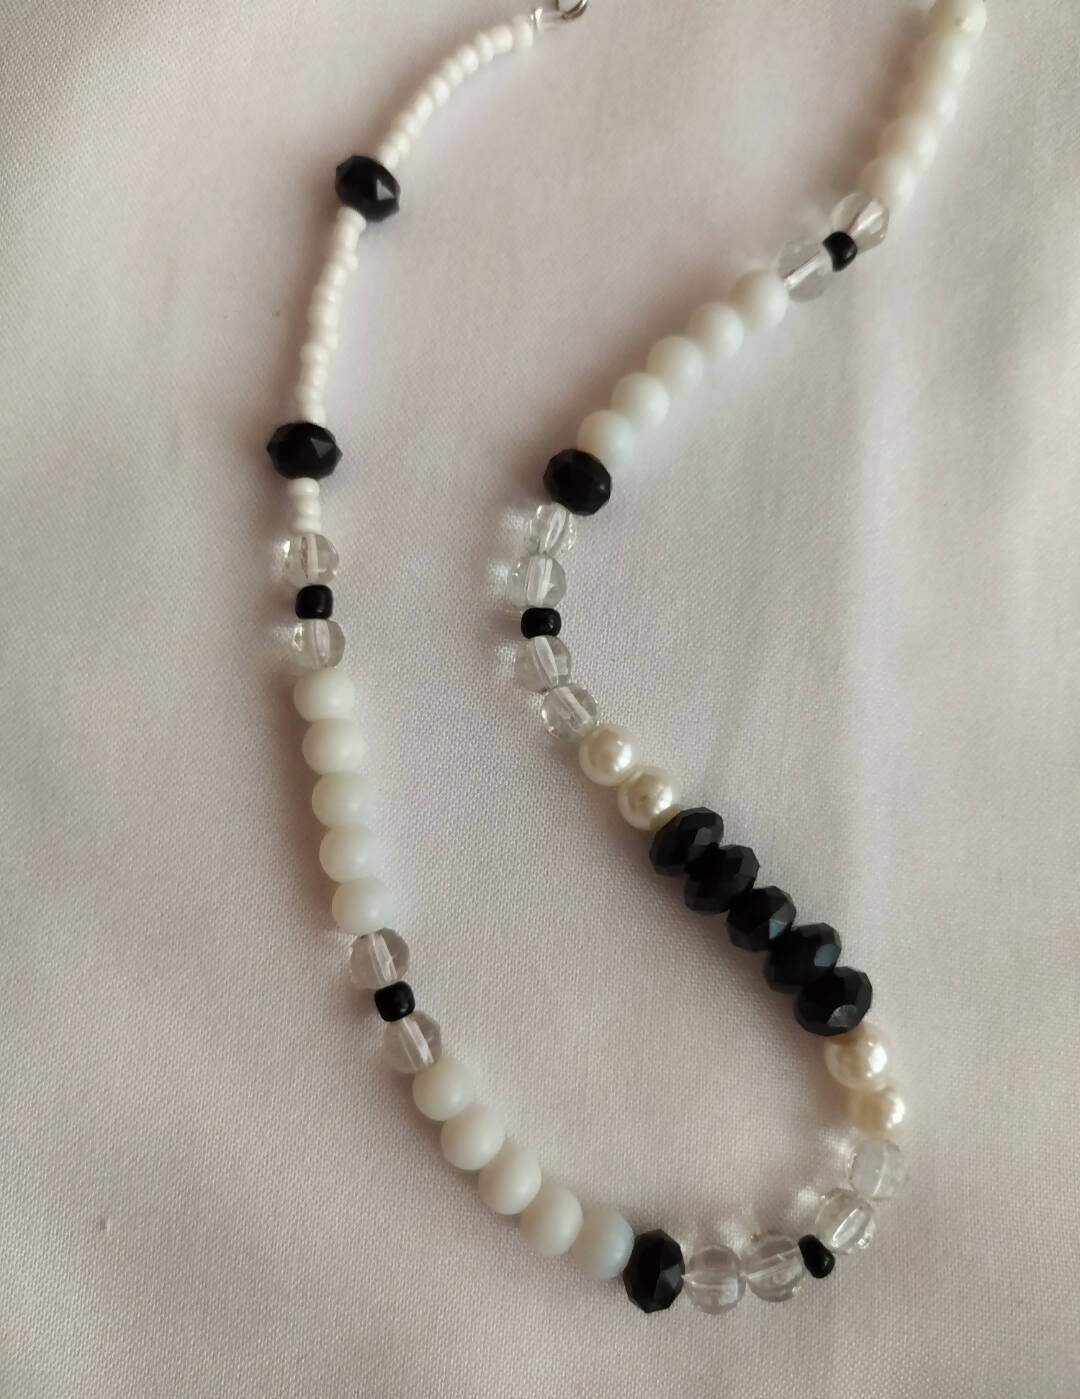 Black and White Necklace